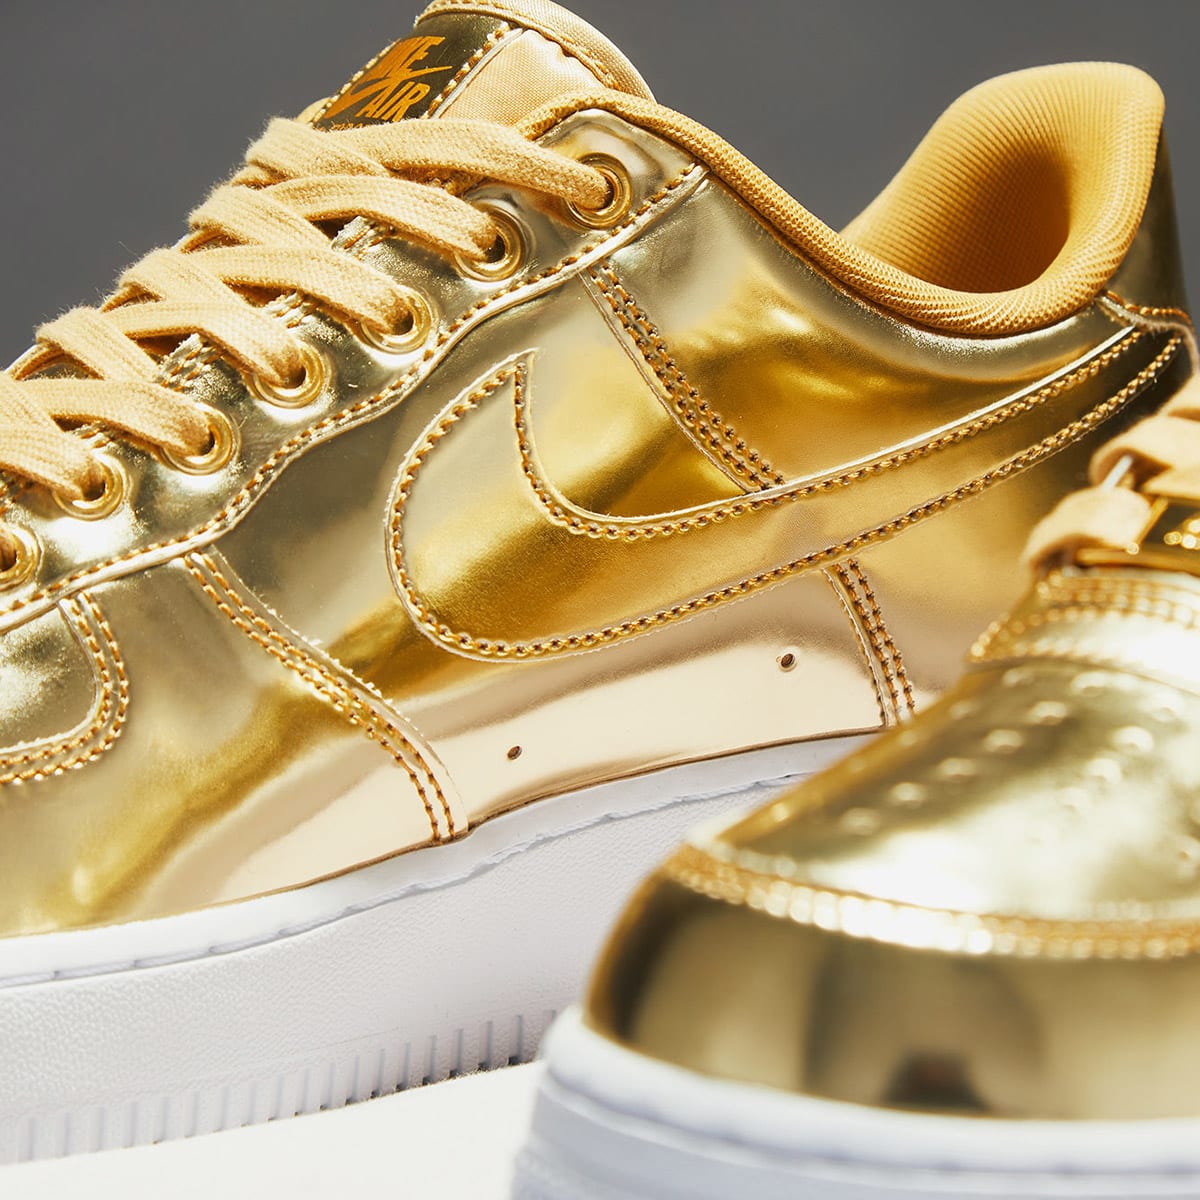 Nike Air Force 1 SP W (Metallic Gold & White) | END. Launches